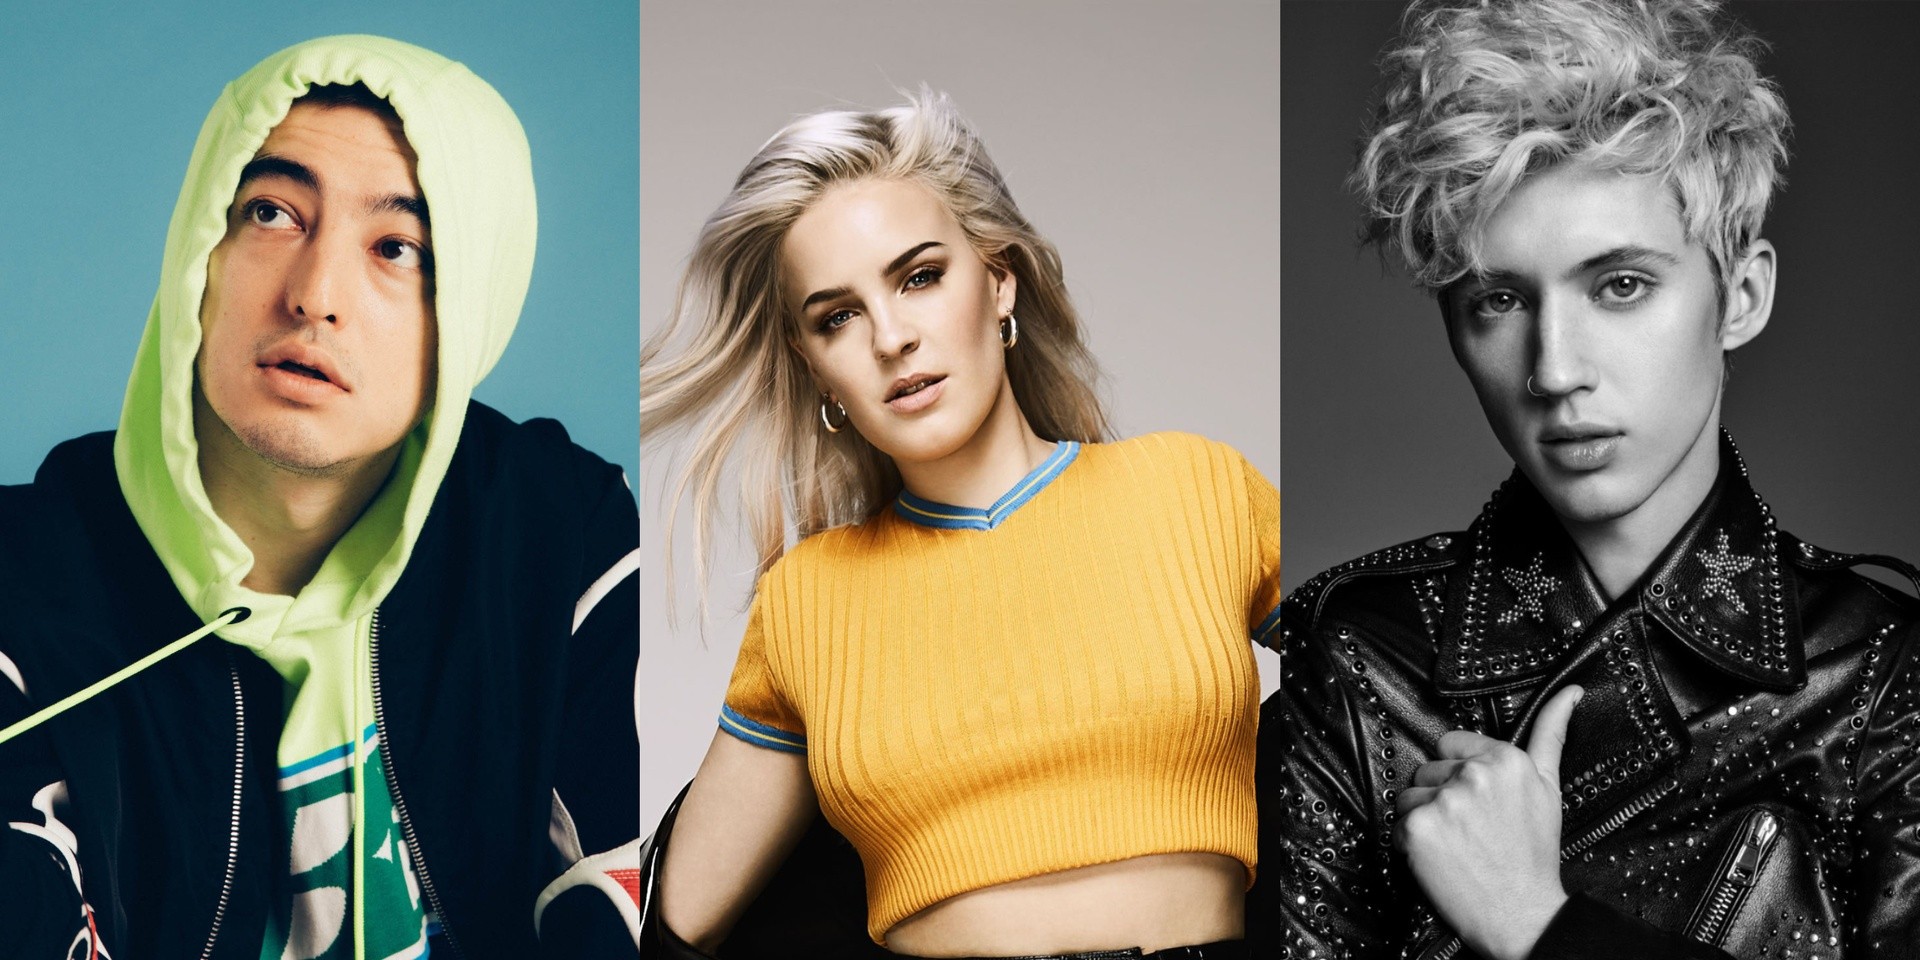 BREAKING: We The Fest announces Phase 2 line-up – Joji, Troye Sivan, Anne-Marie and more confirmed 